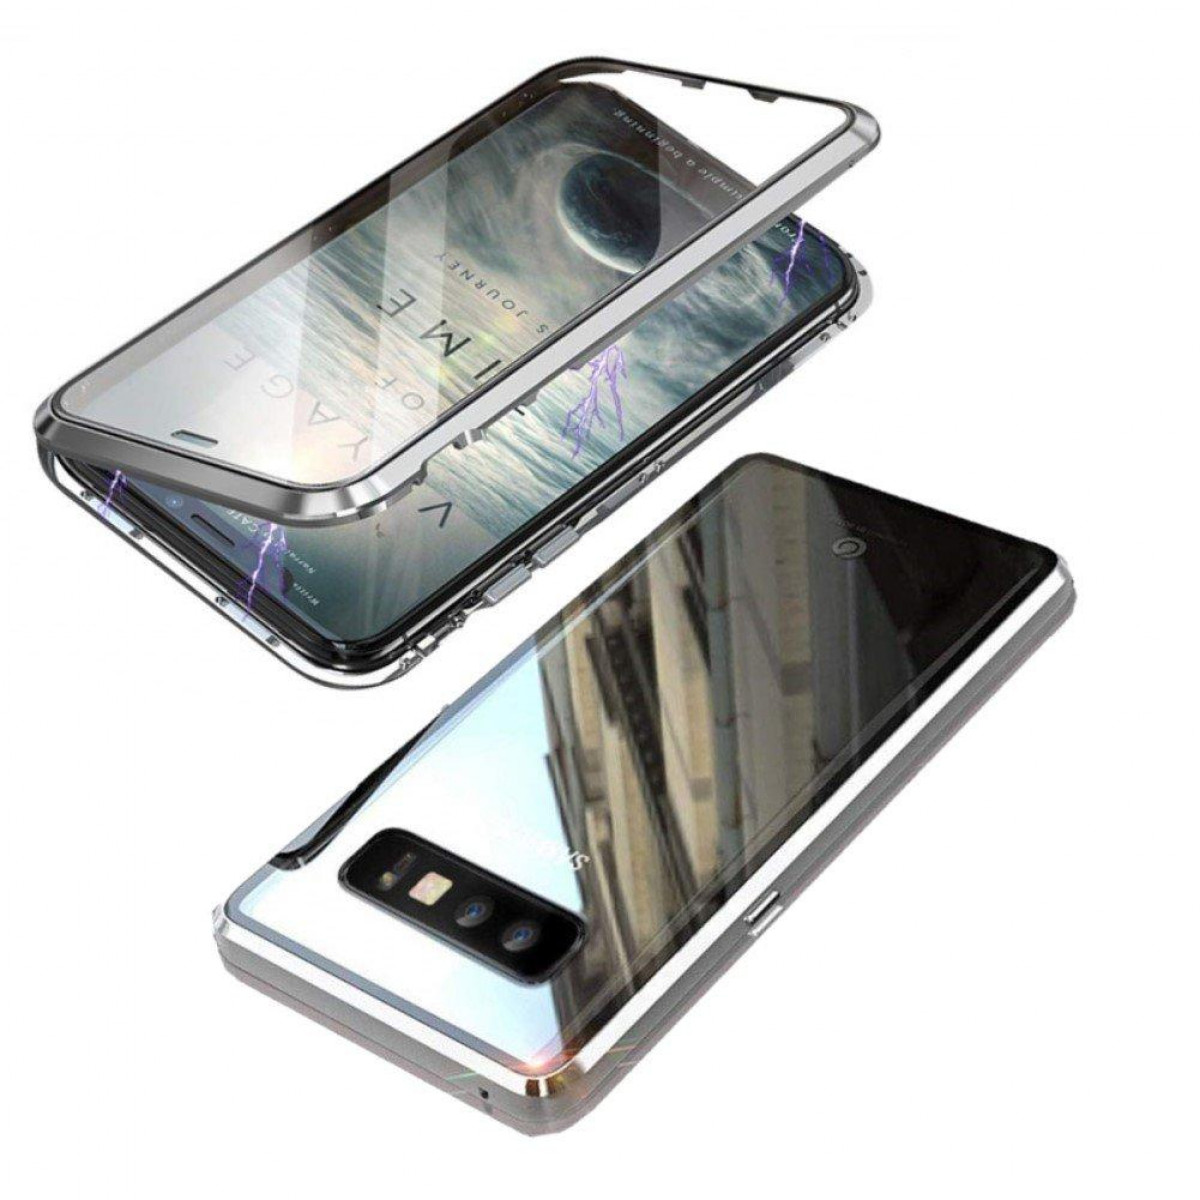 INF Galaxy Full silber S10 Samsung, Cover, Galaxy Plus Plus, S10 Samsung Glas, magnetisch Handyhülle